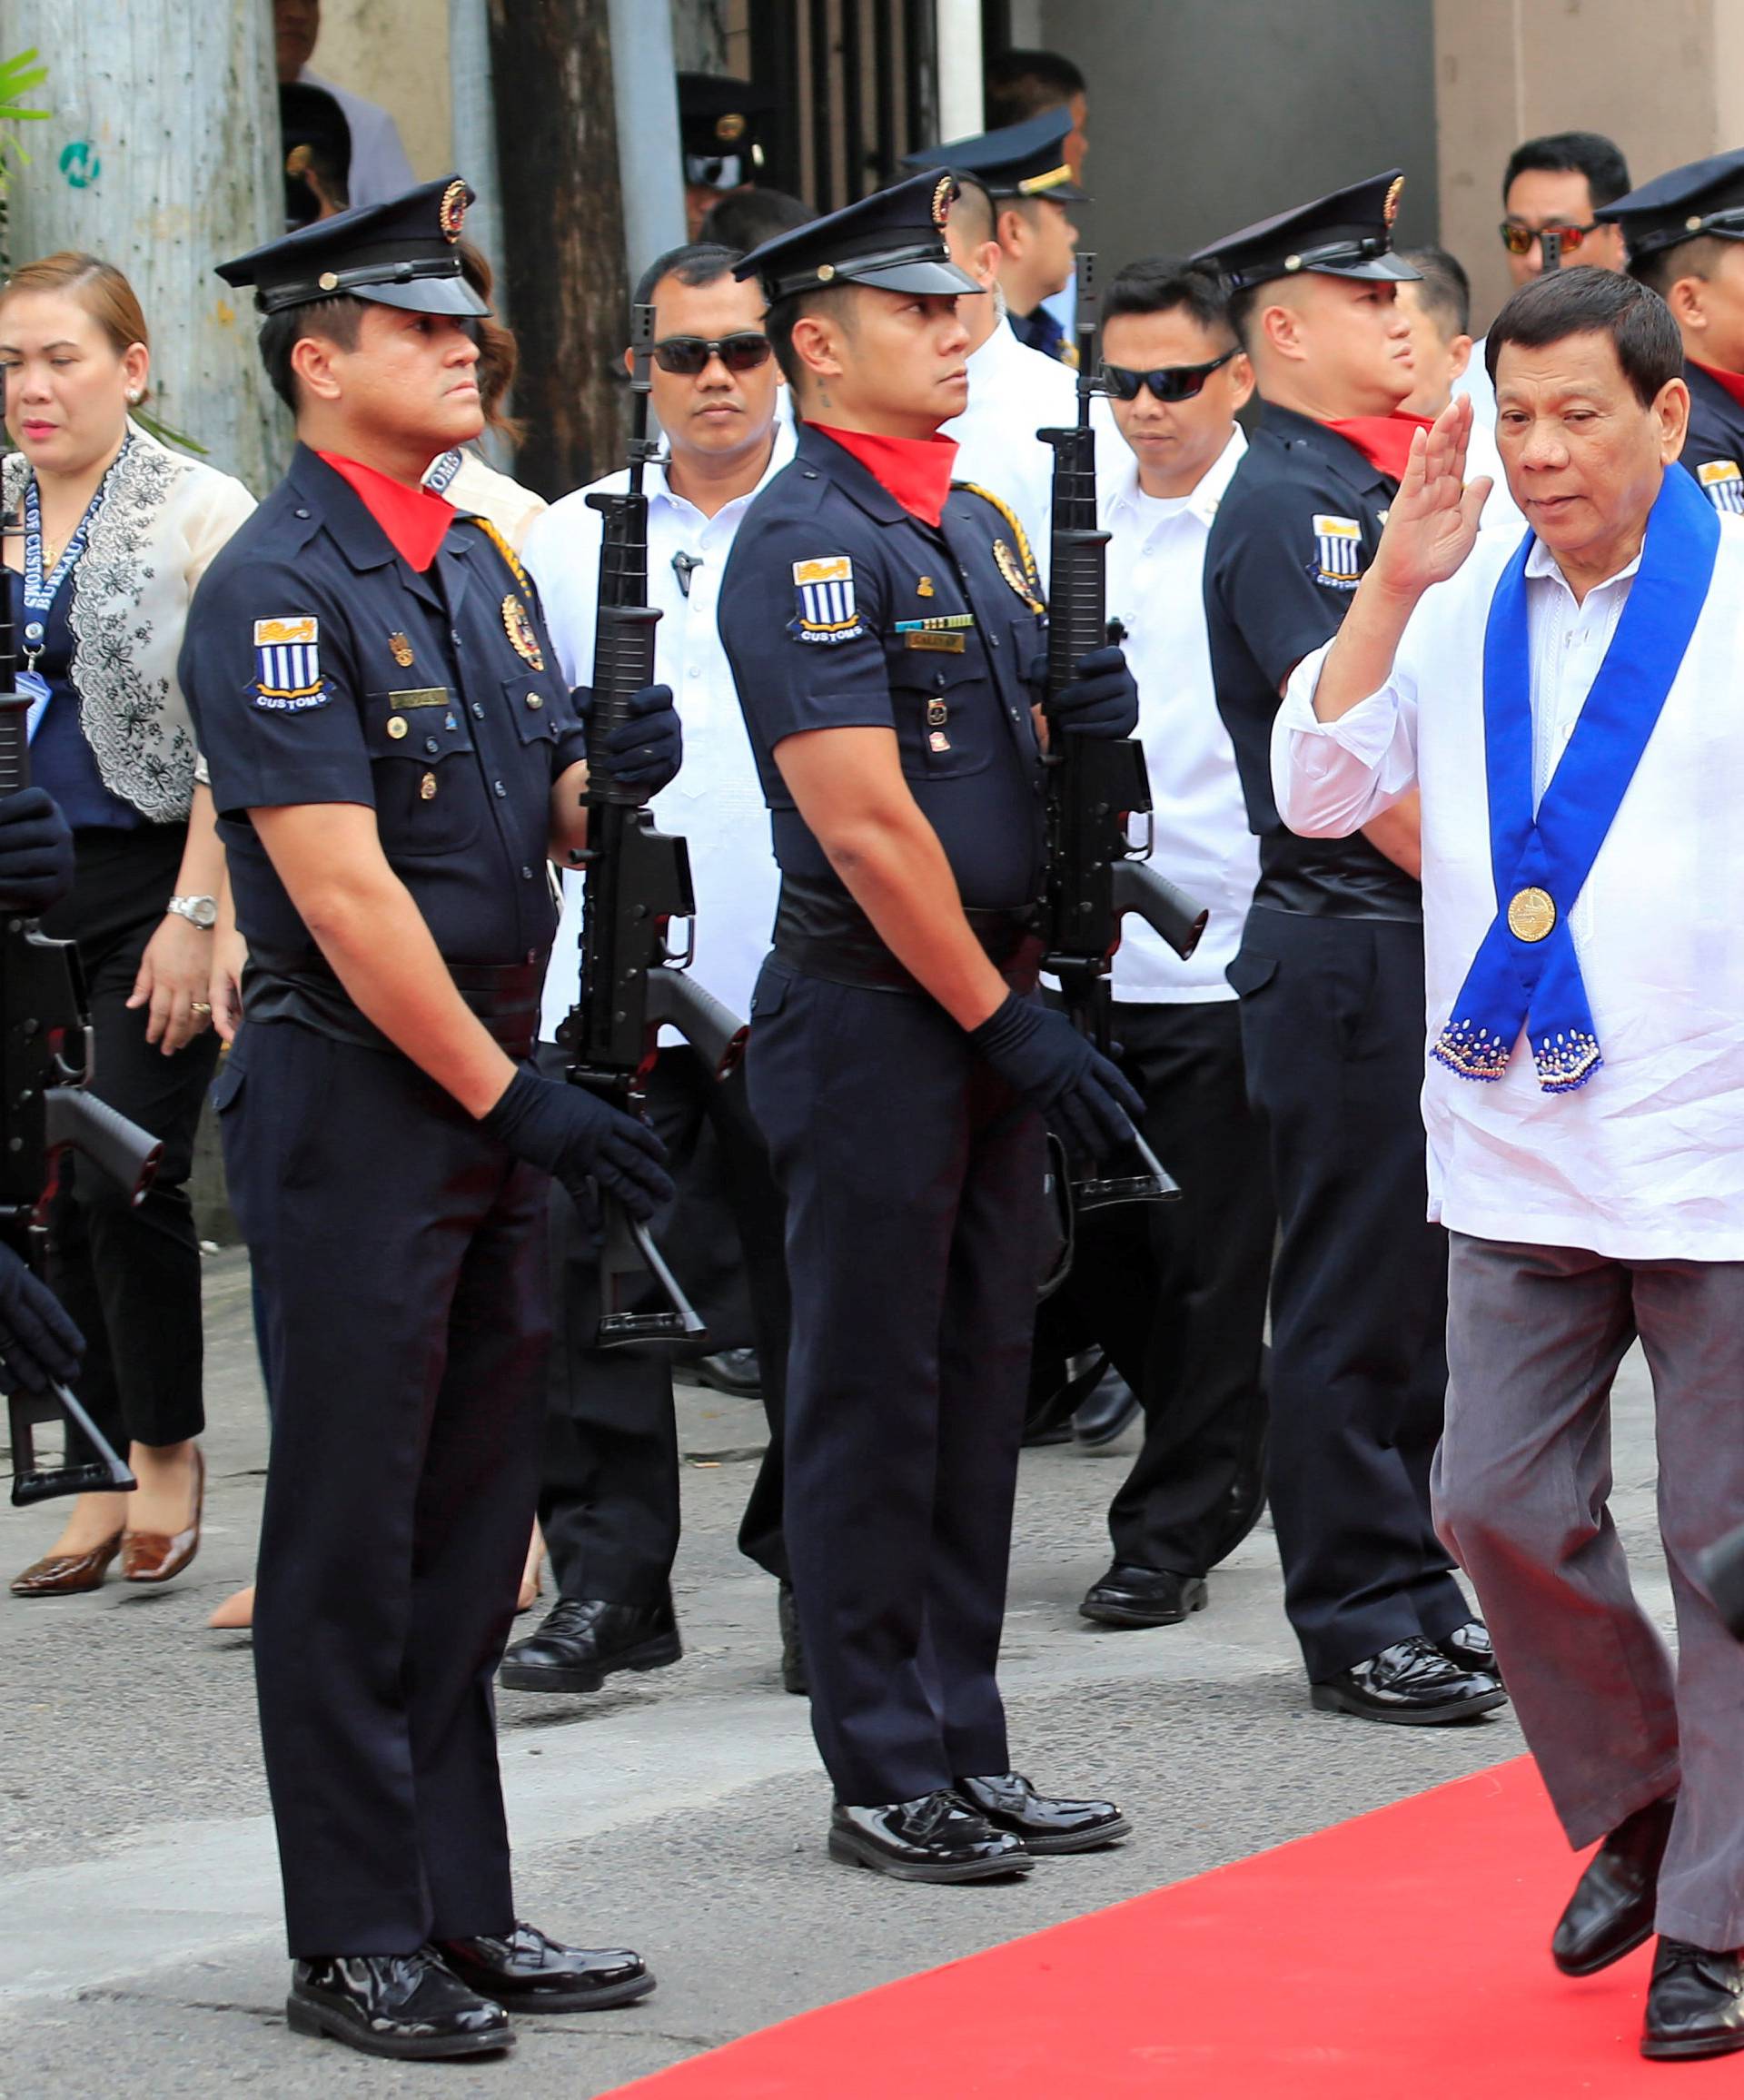 President Rodrigo Duterte salutes while passing members of custom police, upon arrival to witness the destruction of condemned smuggled luxury cars worth 61,626,000.00 pesos (approximately US$1.2 million), in Metro Manila